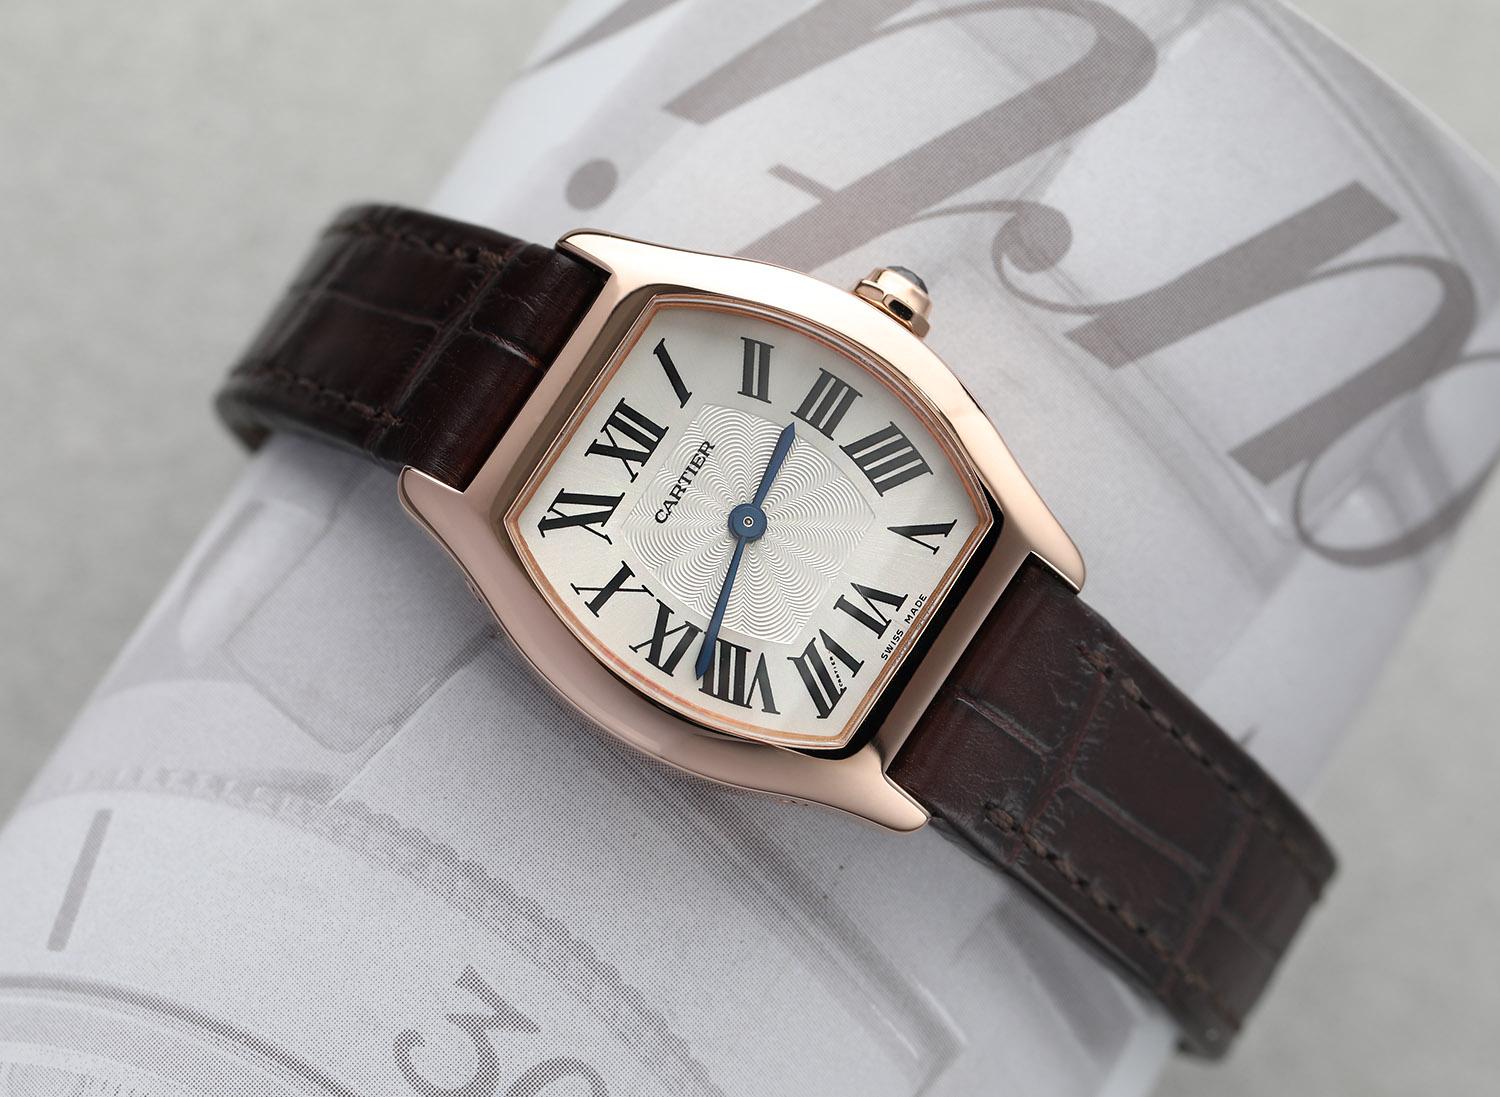 This watch in overall excellent pre-owned condition. It has been professionally polished and necessary adjustments are made to ensure the watch is functioning as intended. Listed pictures are actual pictures of the watch. It comes with a Cartier